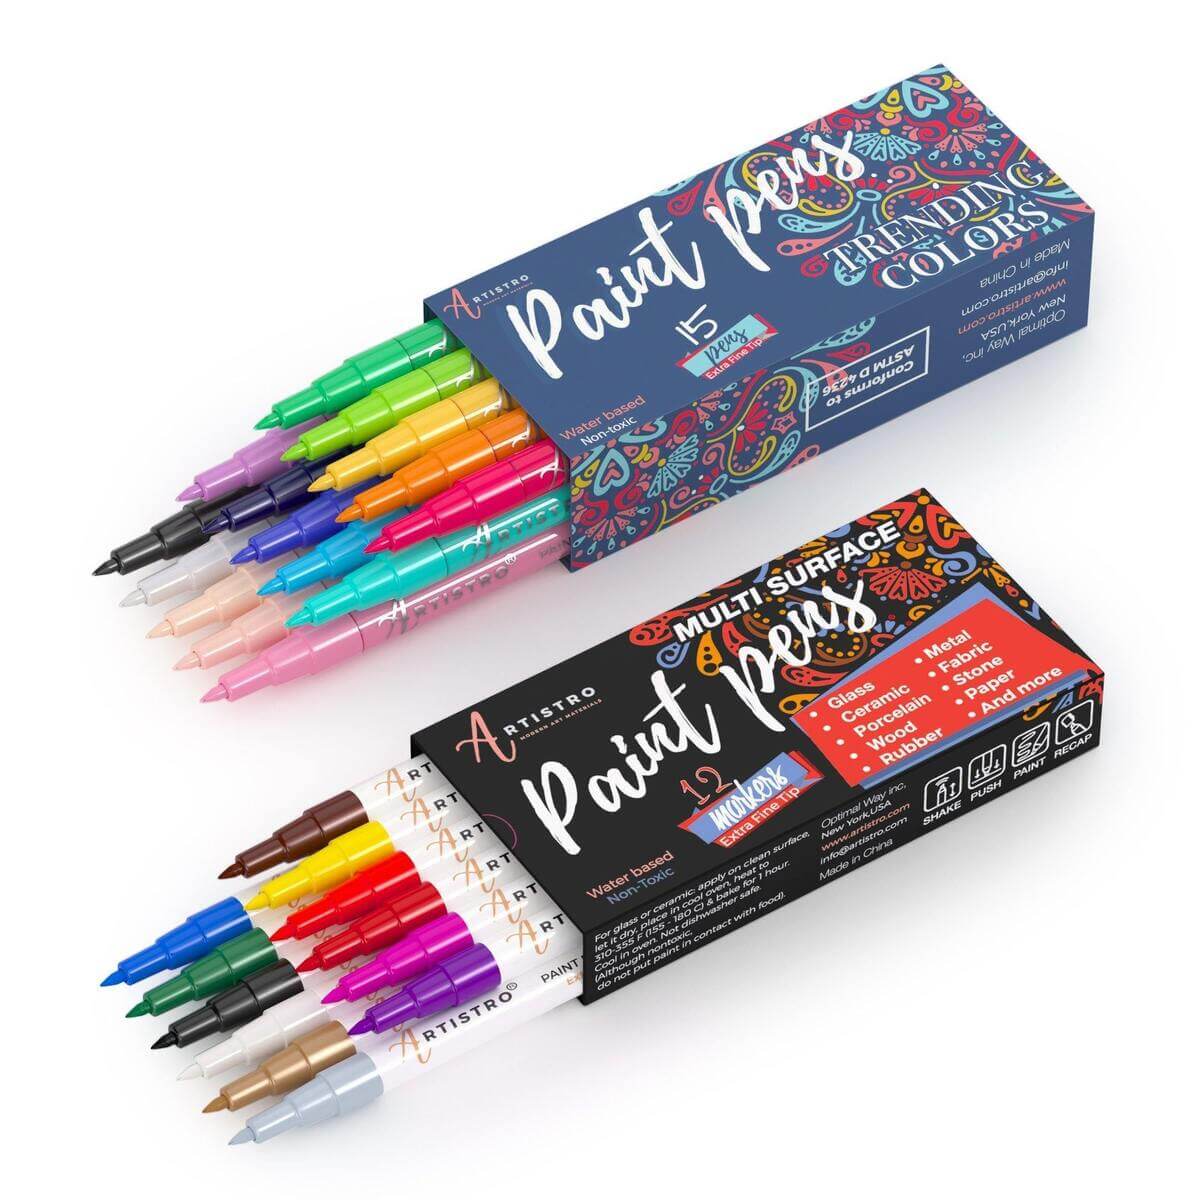 https://artistro.com/cdn/shop/products/27-artistro-acrylic-art-markers-12-extra-fine-tip-paint-pens-15-special-colors-paint-pens-for-rock-wood-glass-ceramic-painting-502378_1200x.jpg?v=1639064765